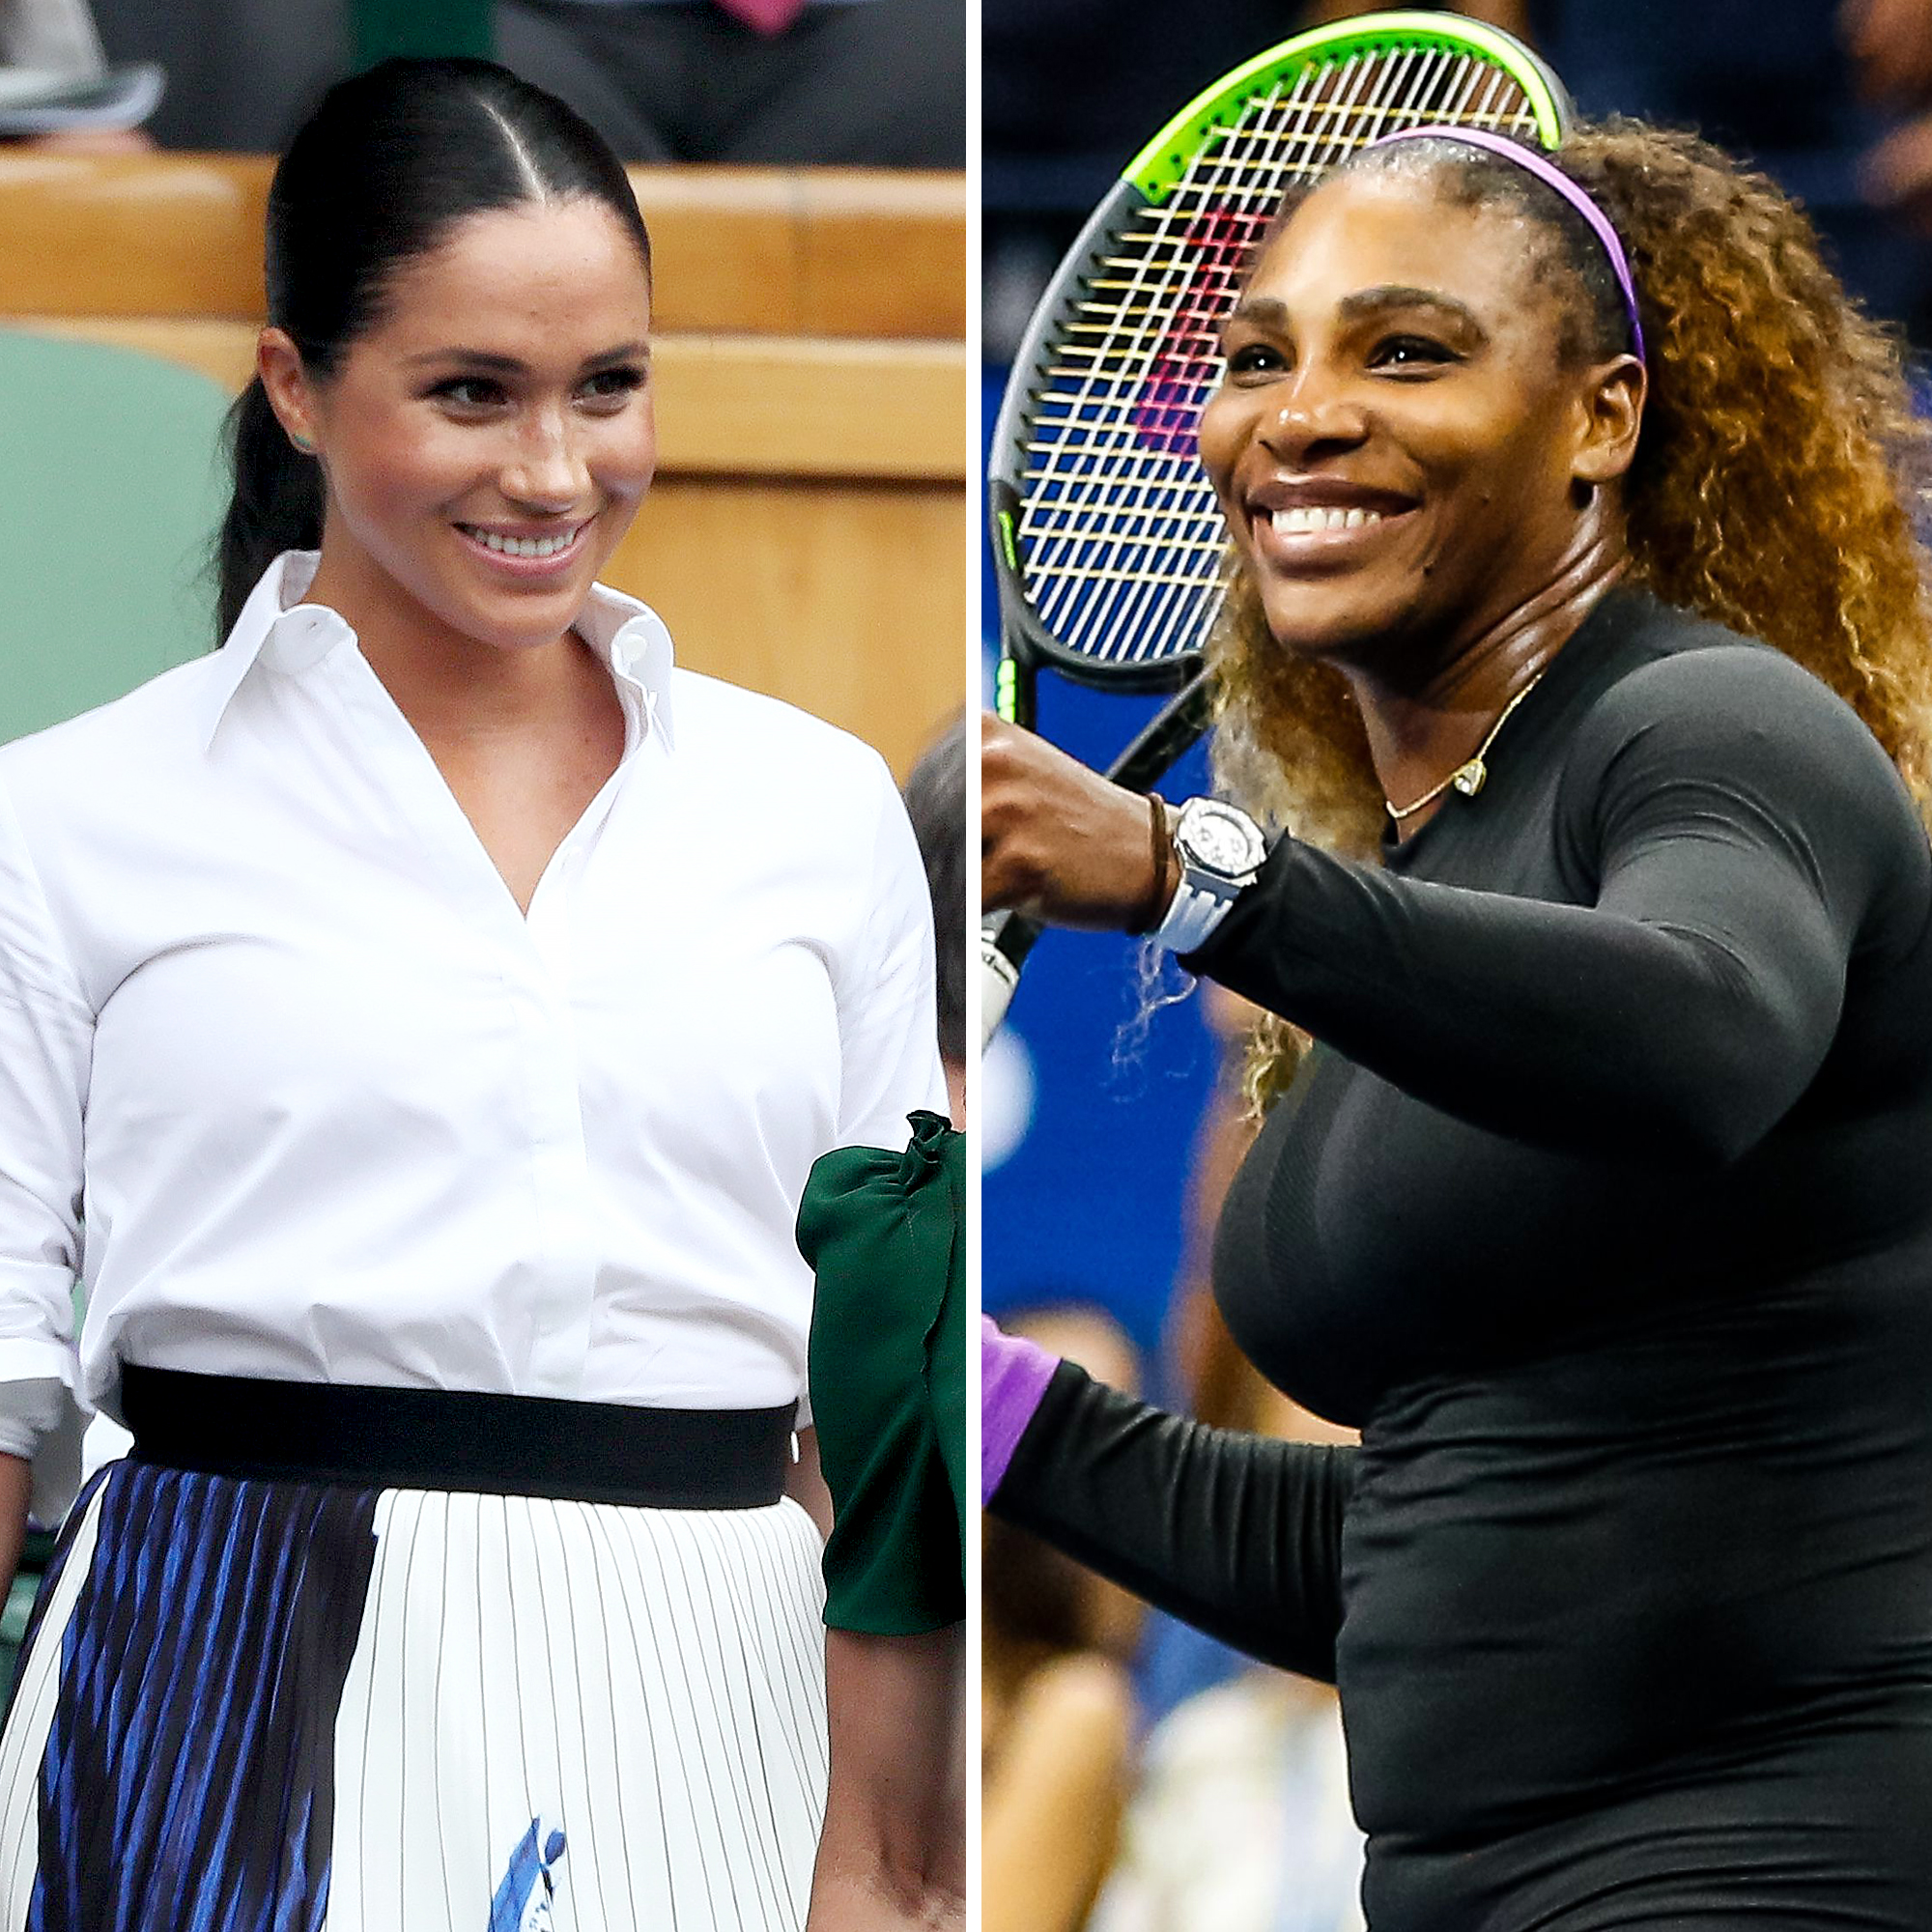 Meghan Markle Flies to NYC to Watch Serena Williams in US Open Final